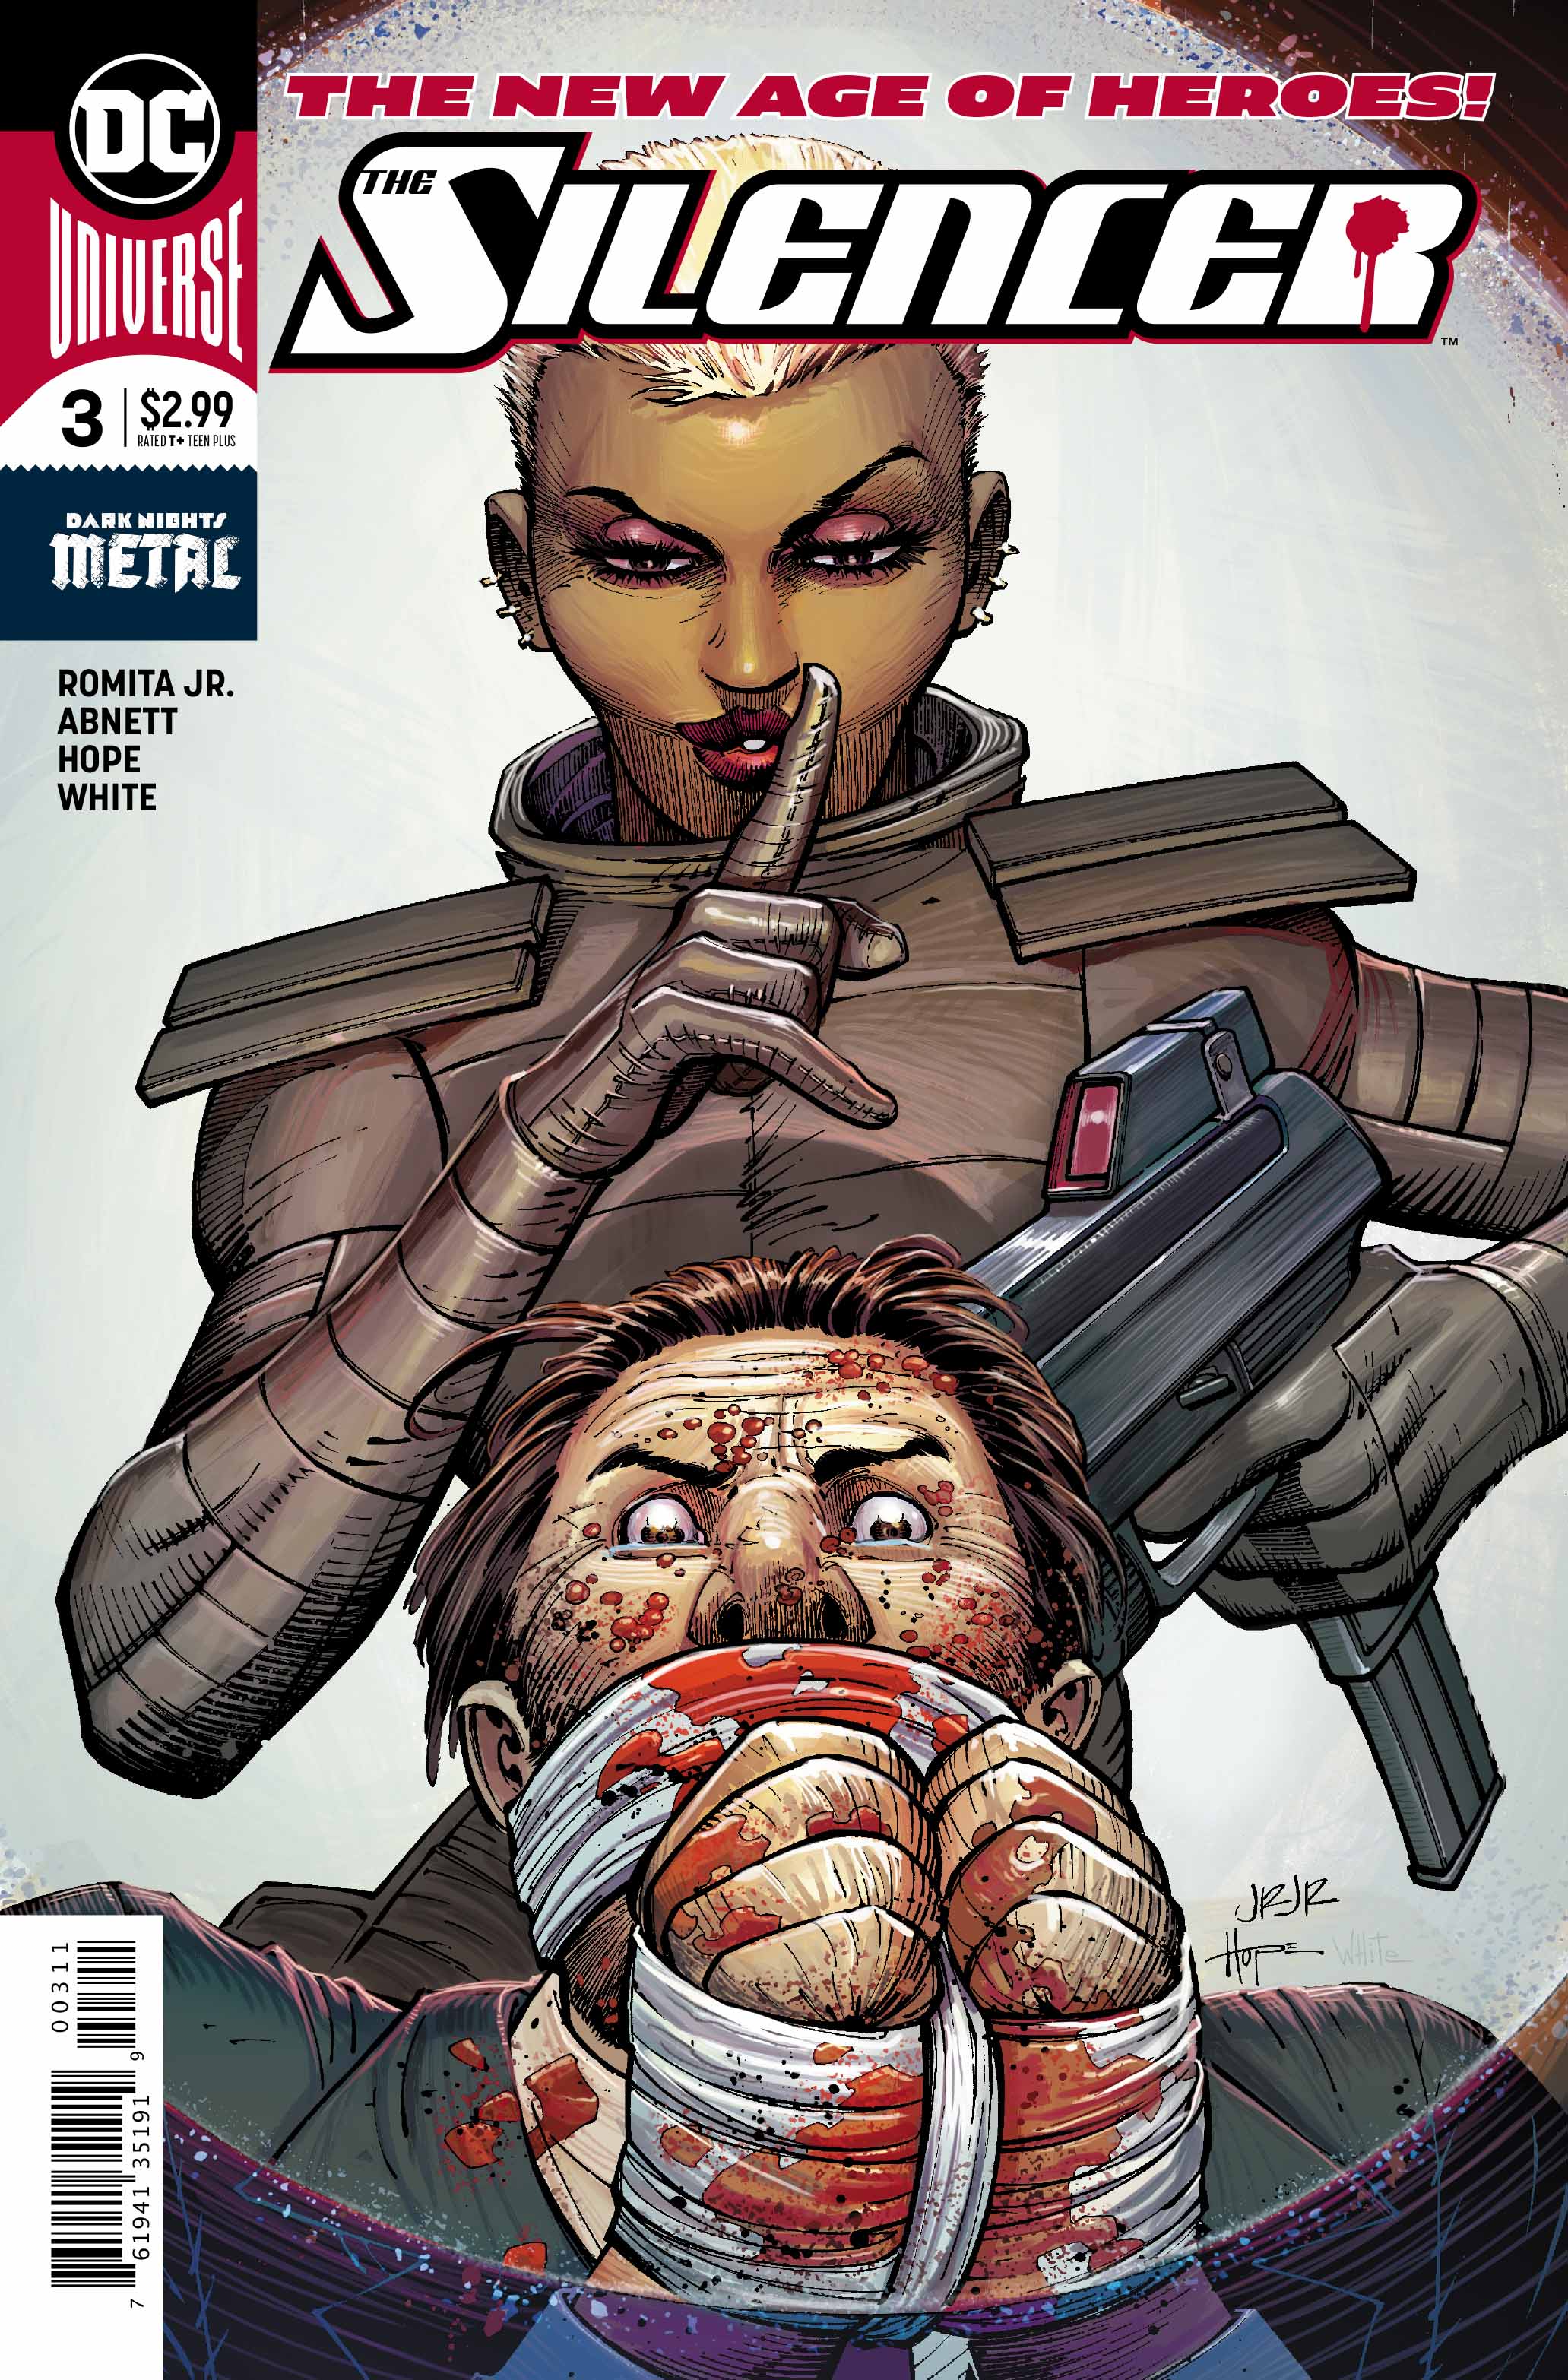 The Silencer #3 Review